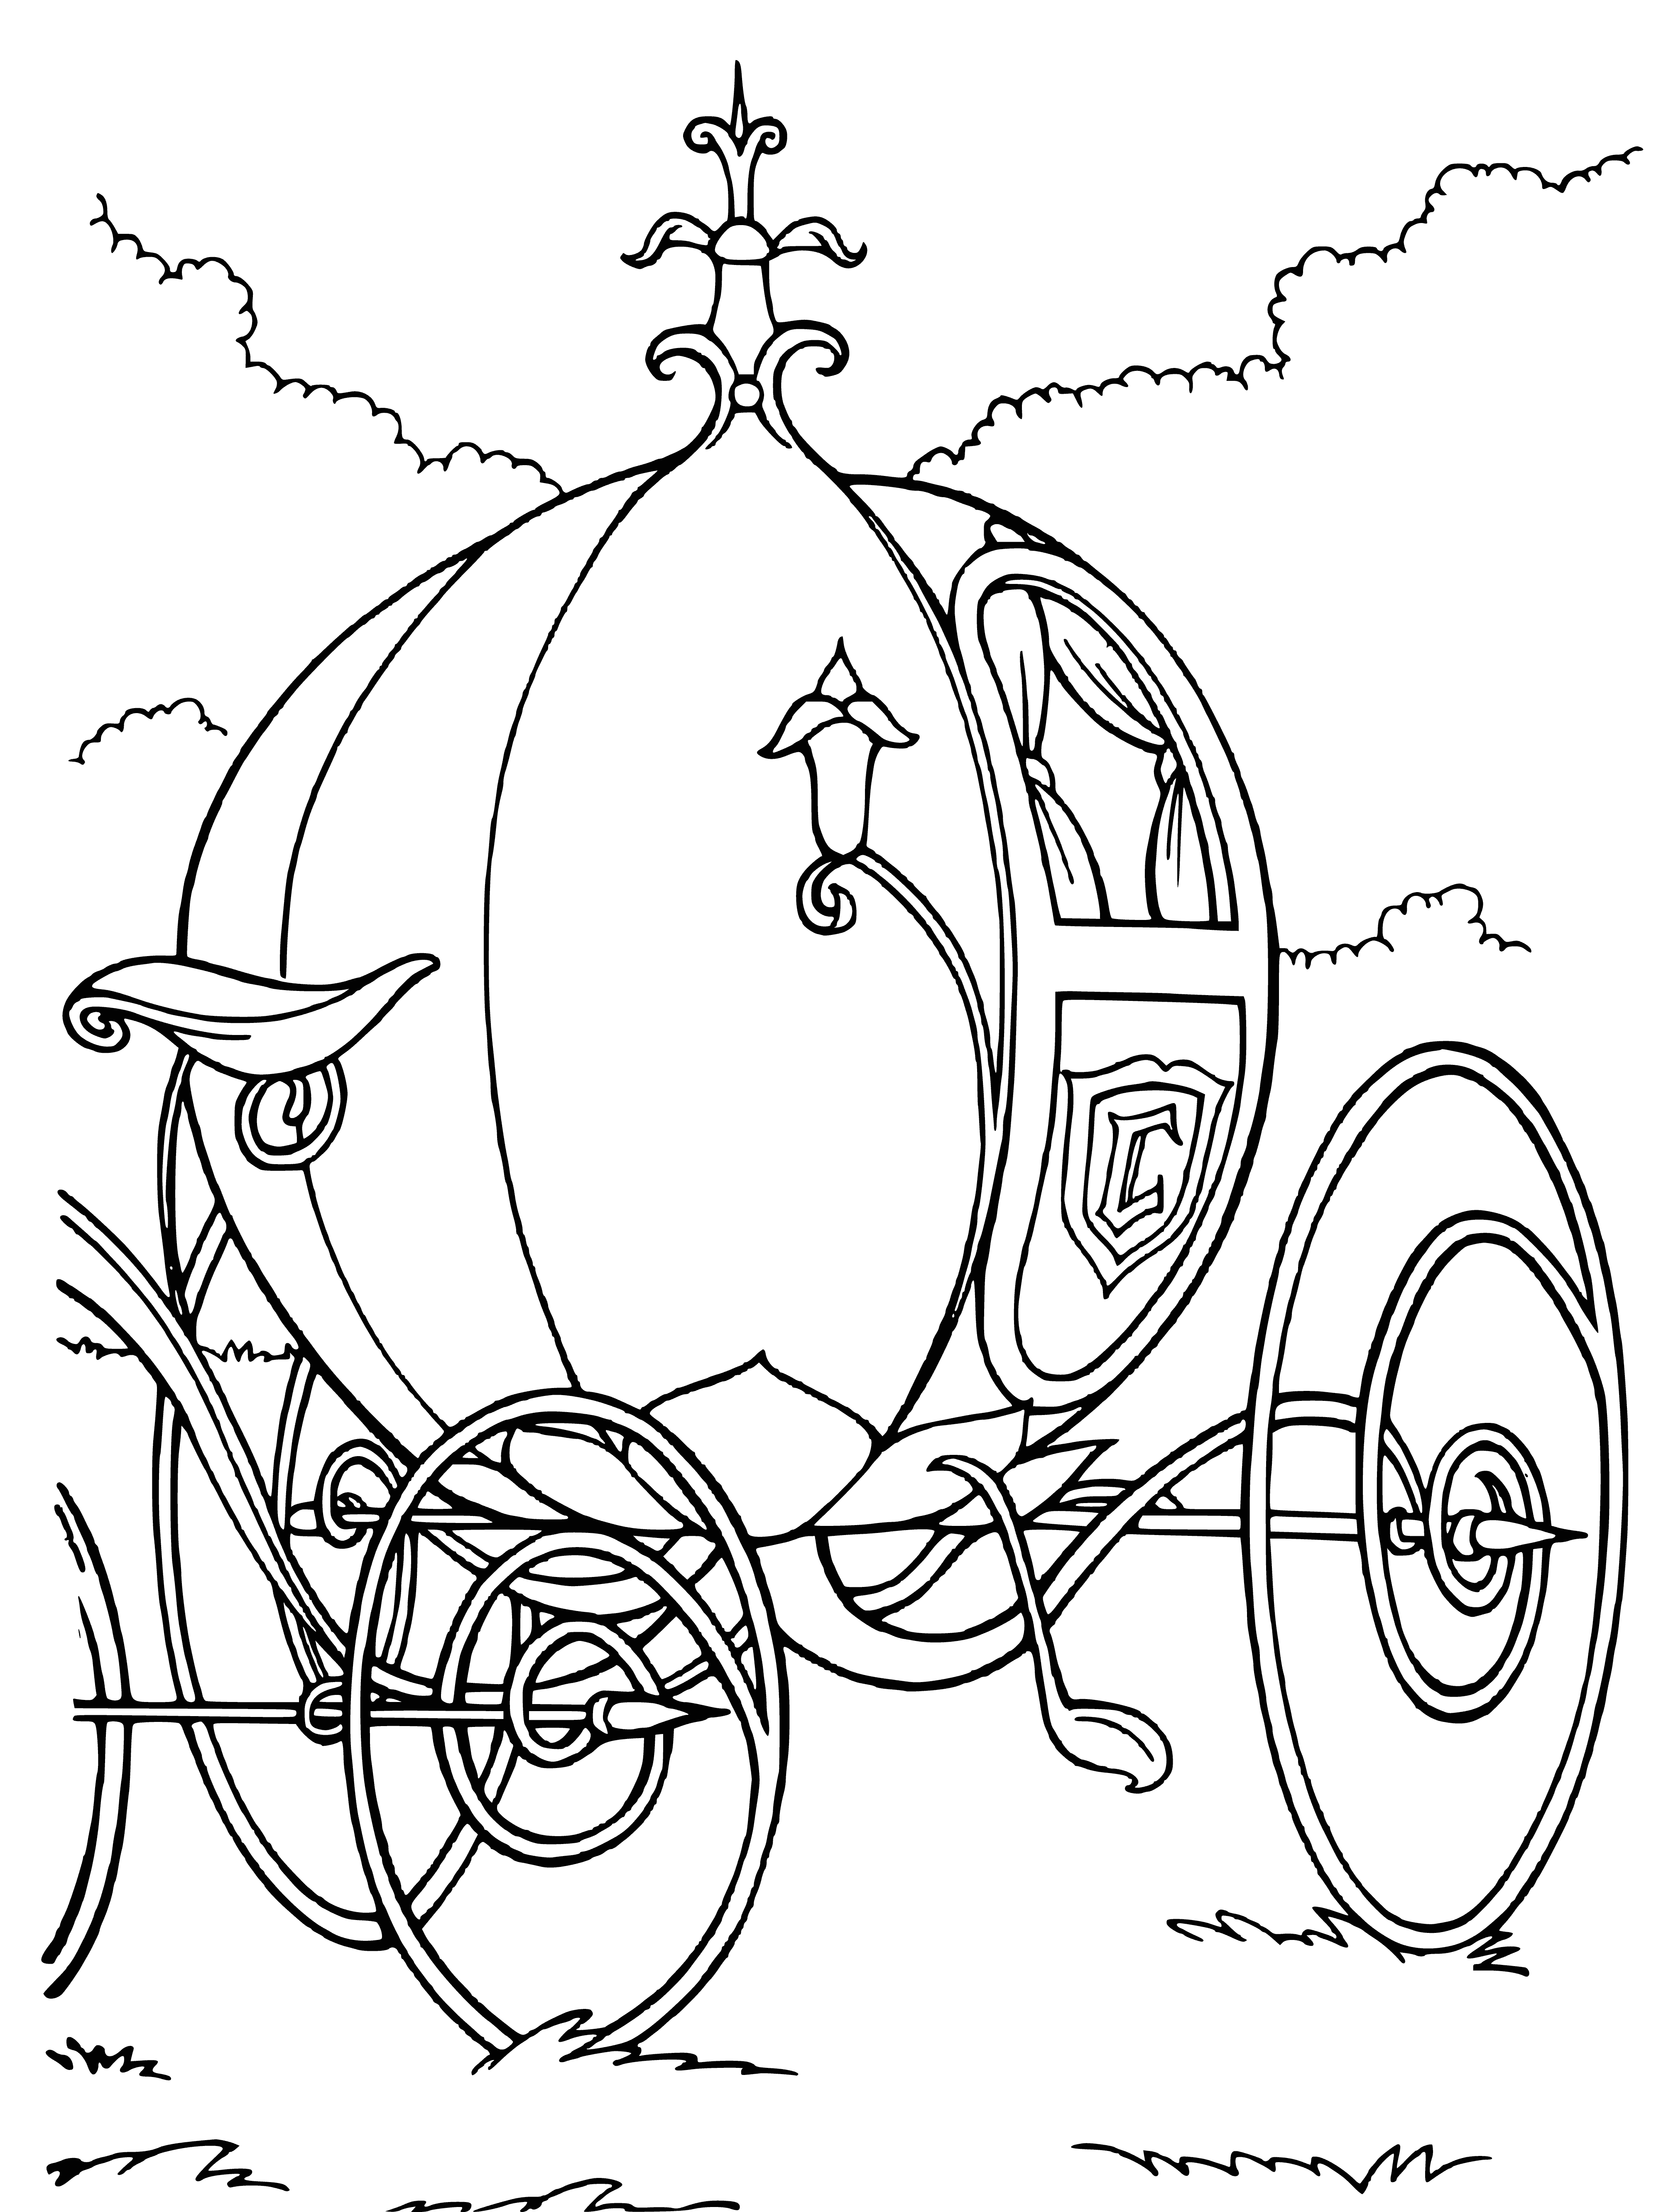 coloring page: Pumpkin turned into ornate golden carriage, with coachman's hat on top.